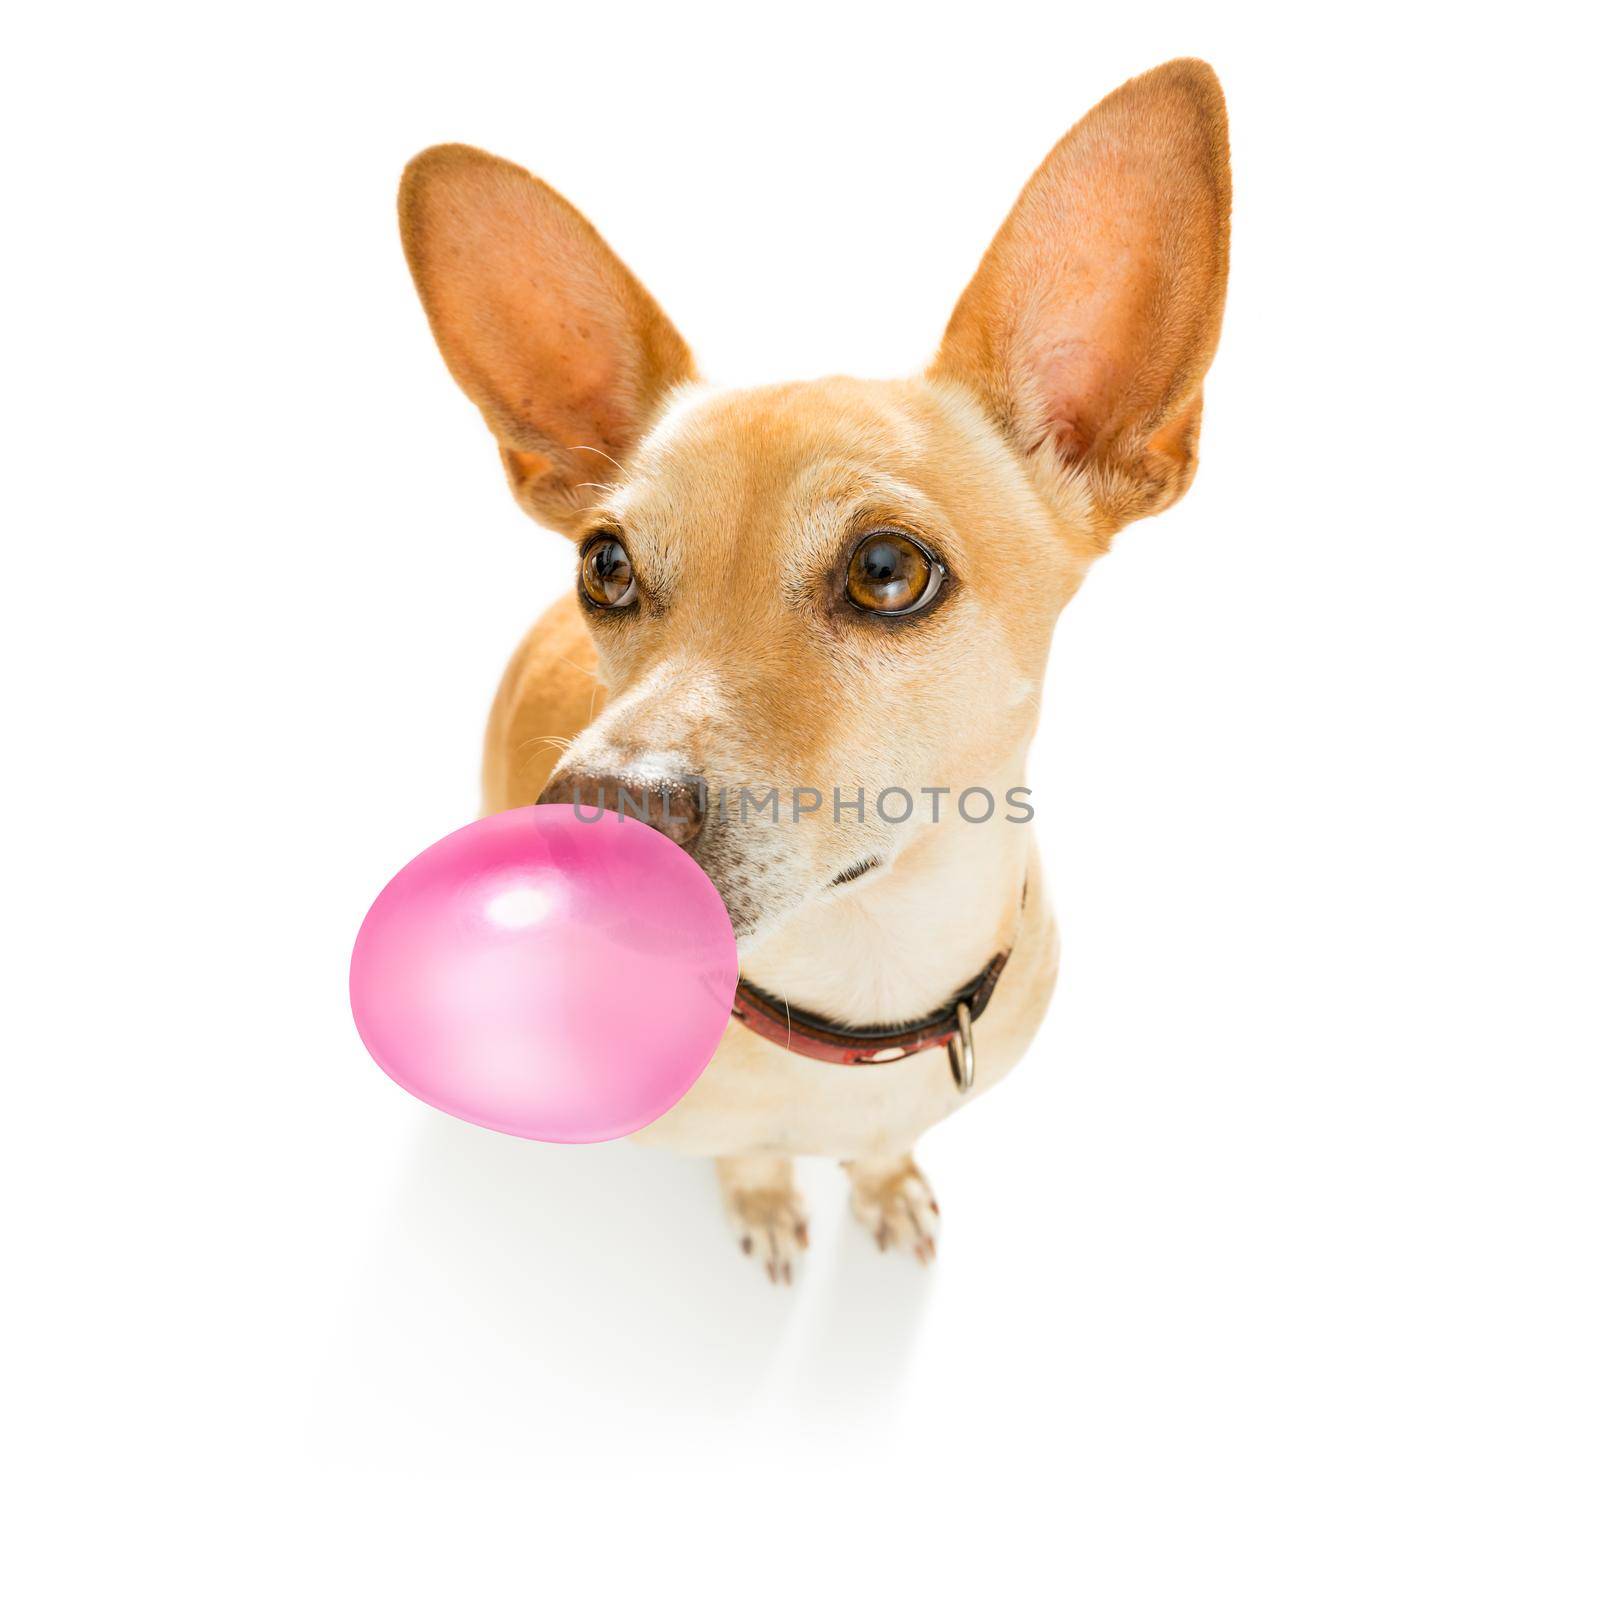 curious chihuahua dog  looking up to owner waiting or sitting patient to play or go for a walk with  chewing bubble gum ,   isolated on white background